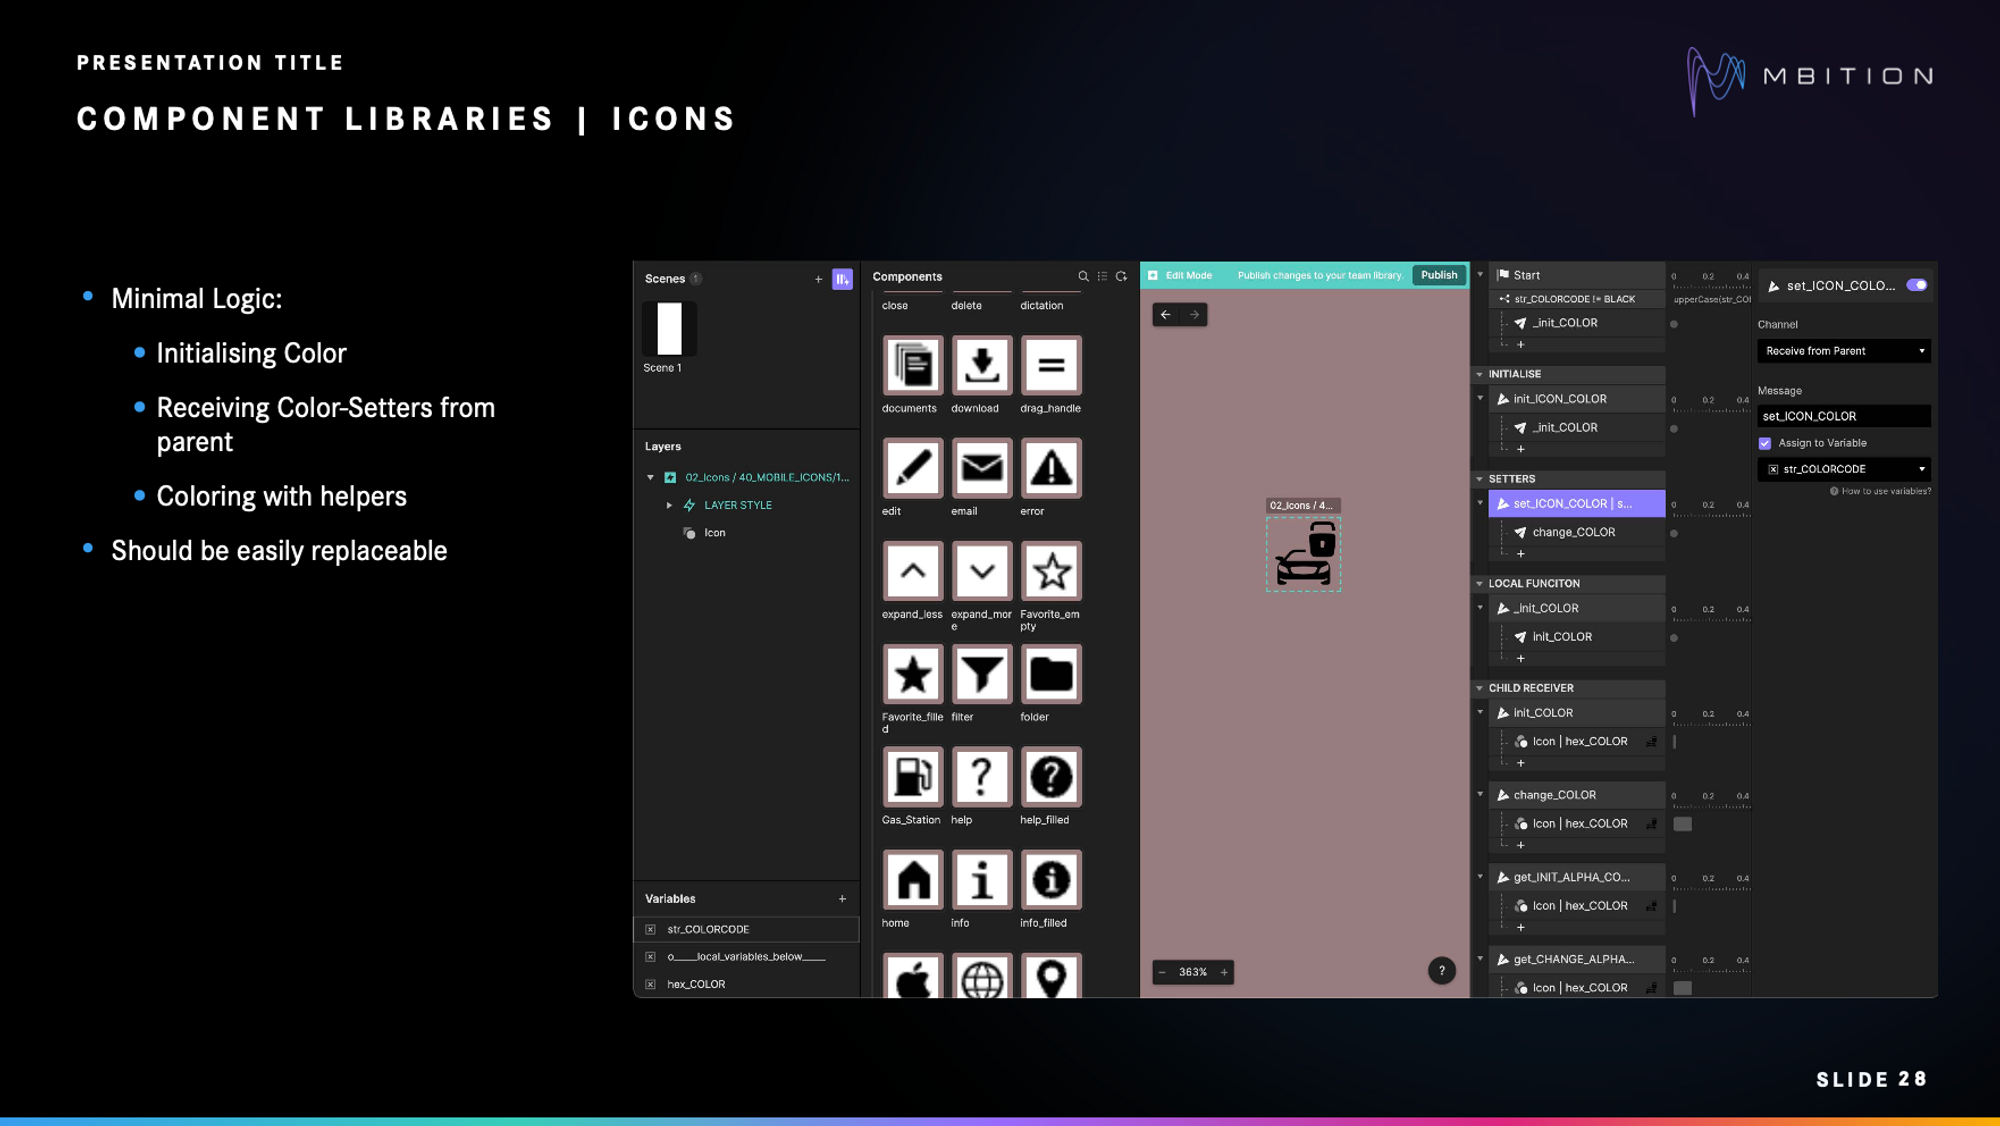 Library of icon components.